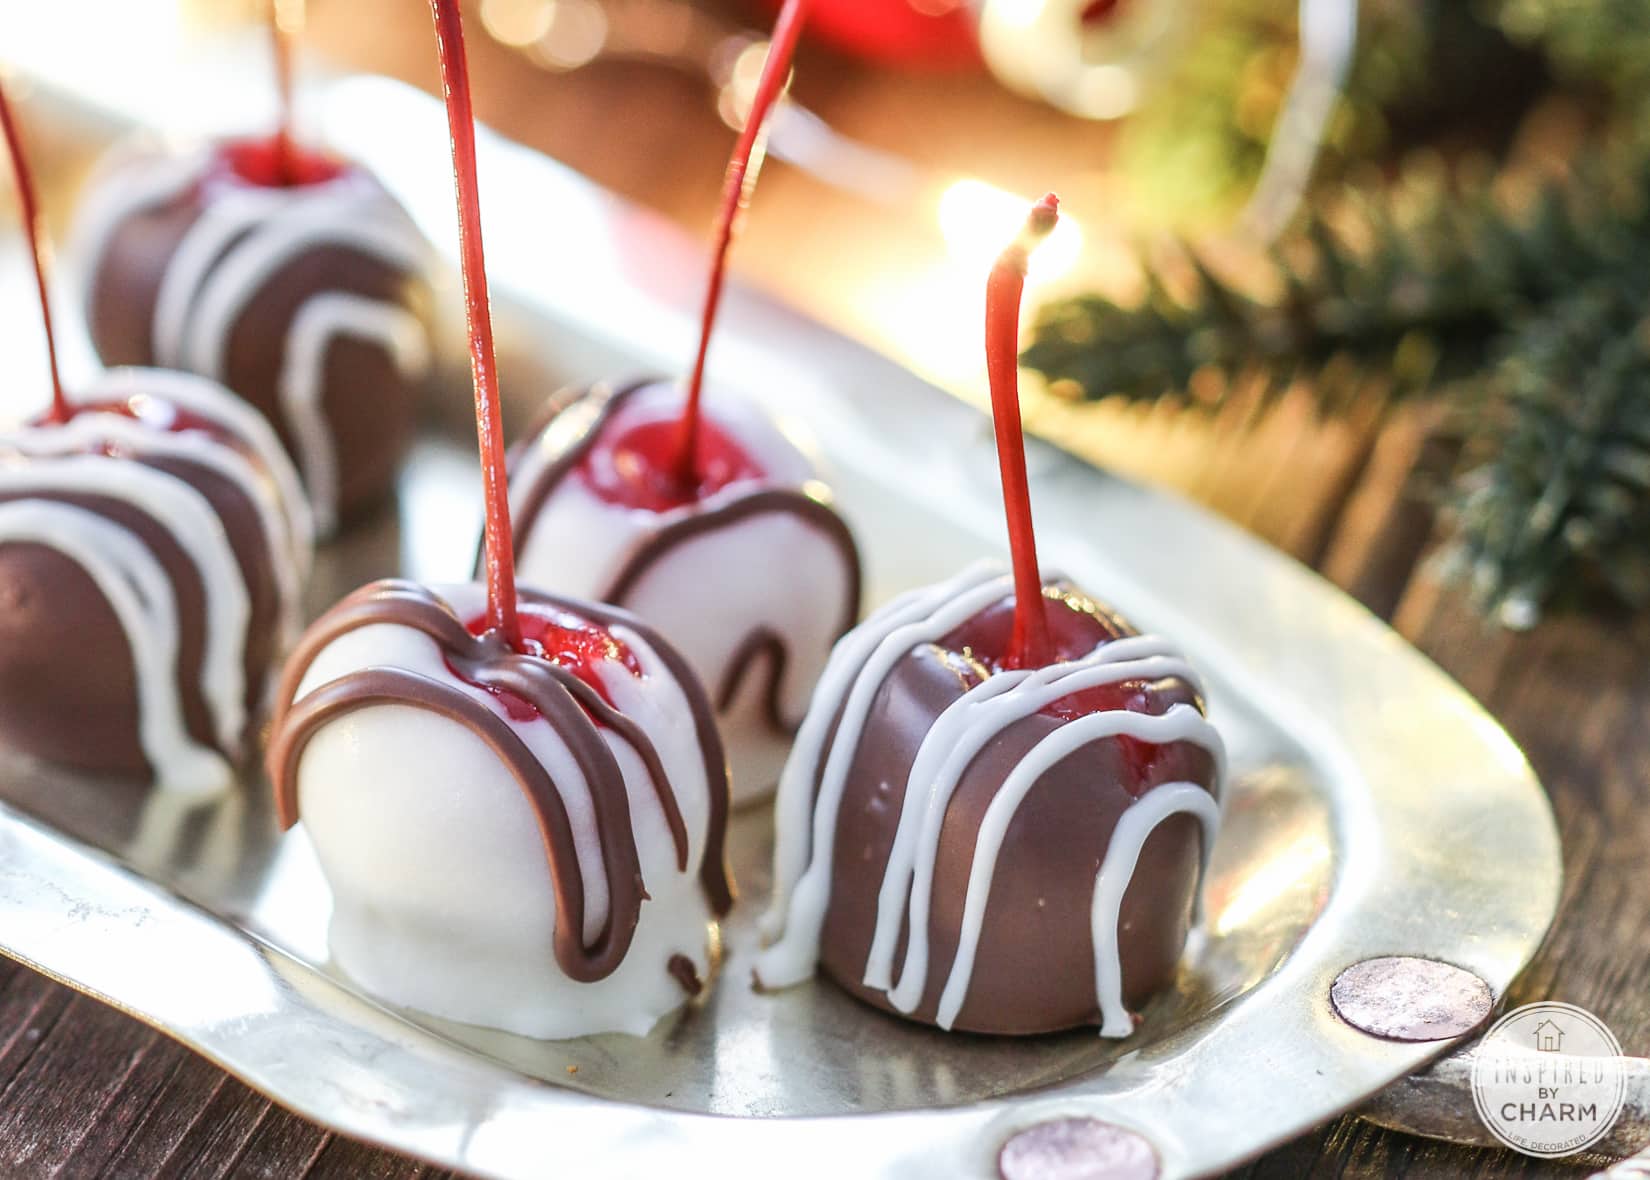 Spiked Chocolate Covered Cherries